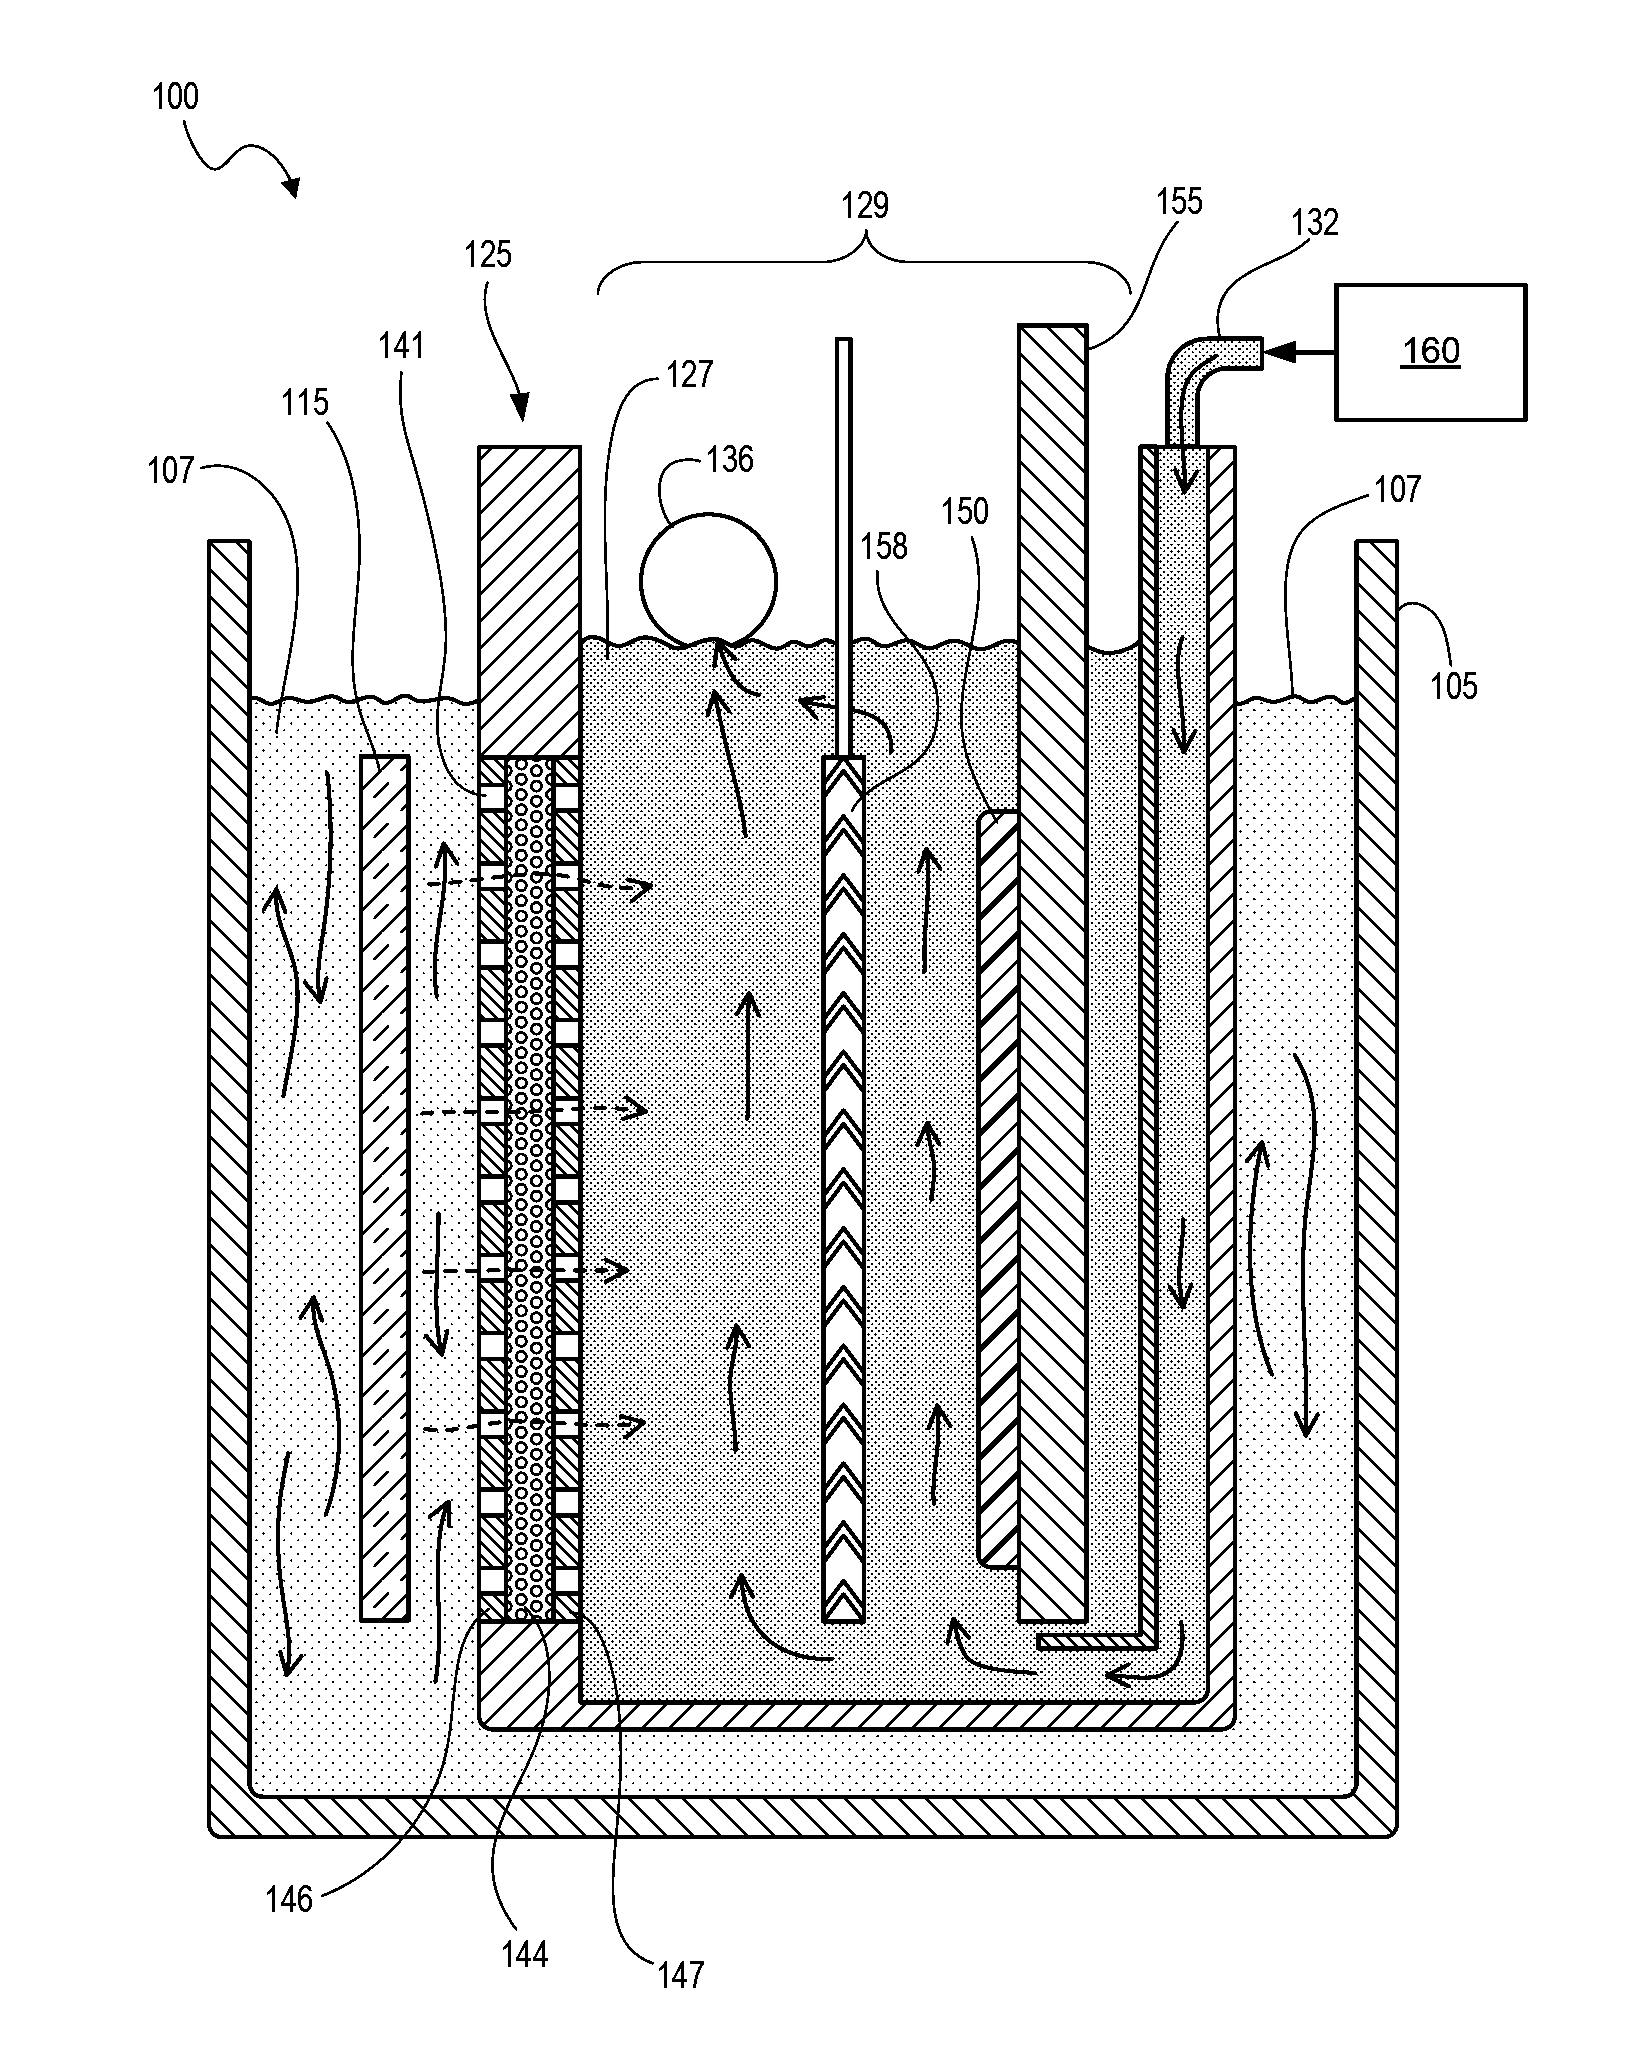 Electrochemical deposition apparatus with remote catholyte fluid management